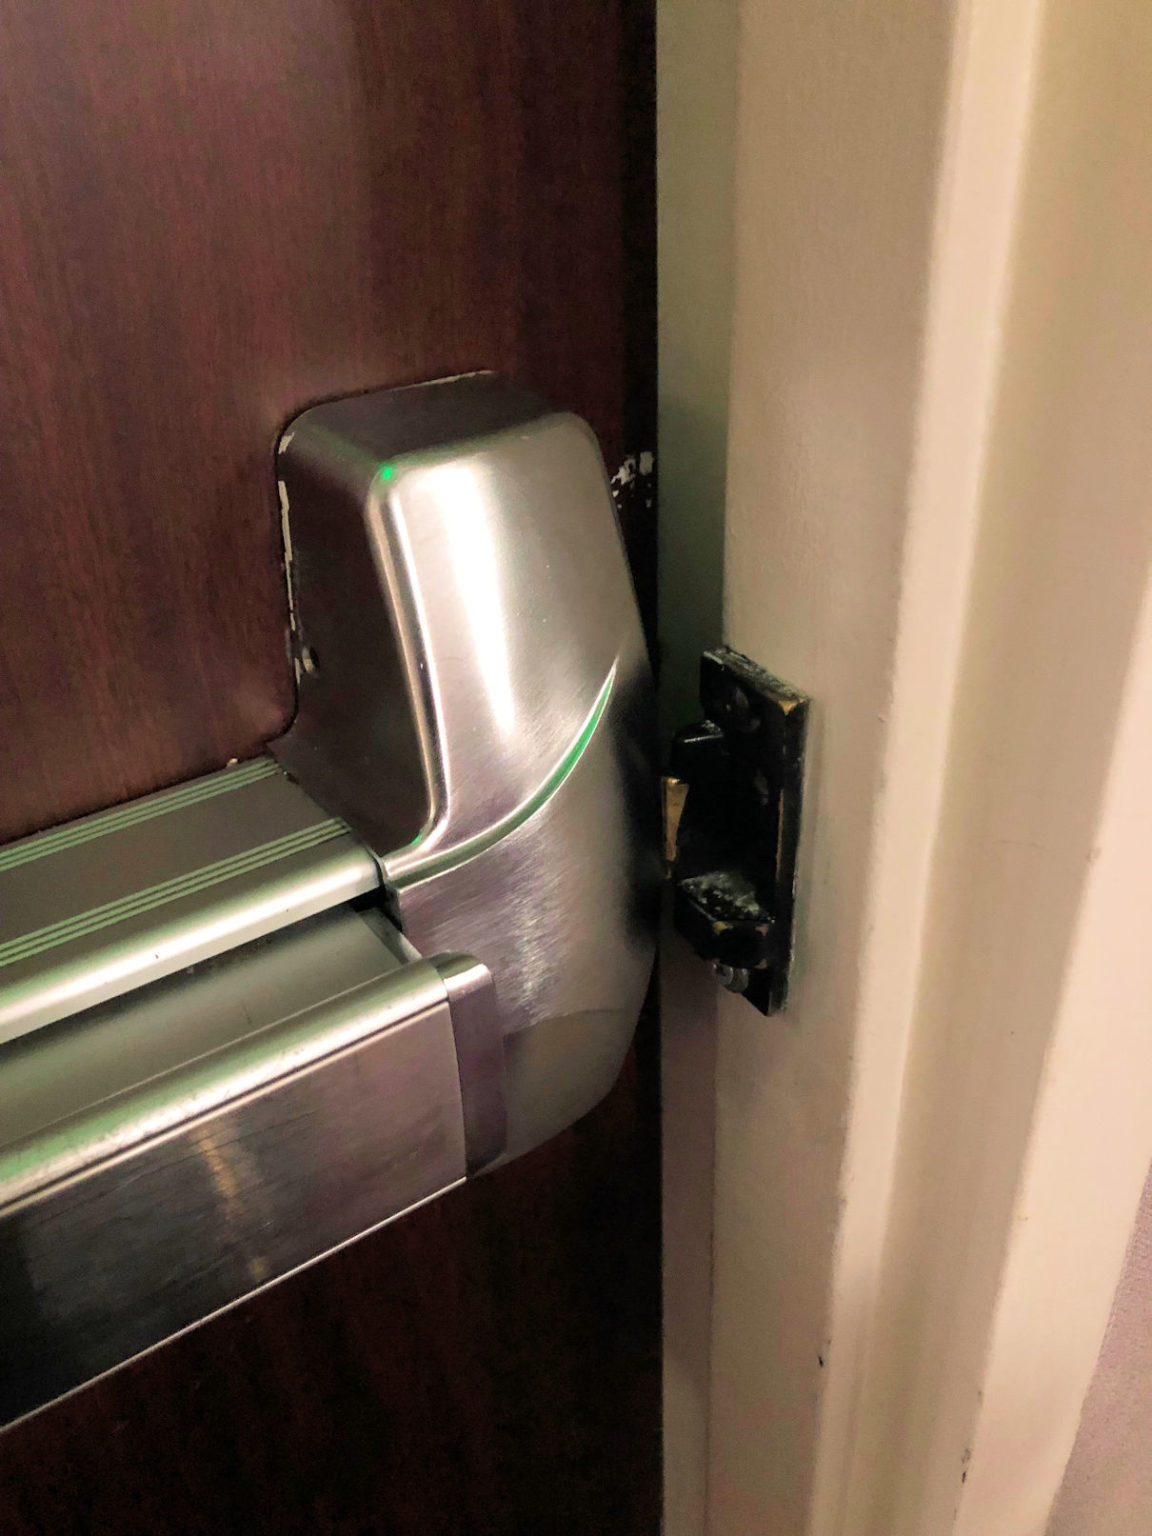 WW Hotel Fire Doors I Dig Hardware Answers To Your Door Hardware And Code Questions From